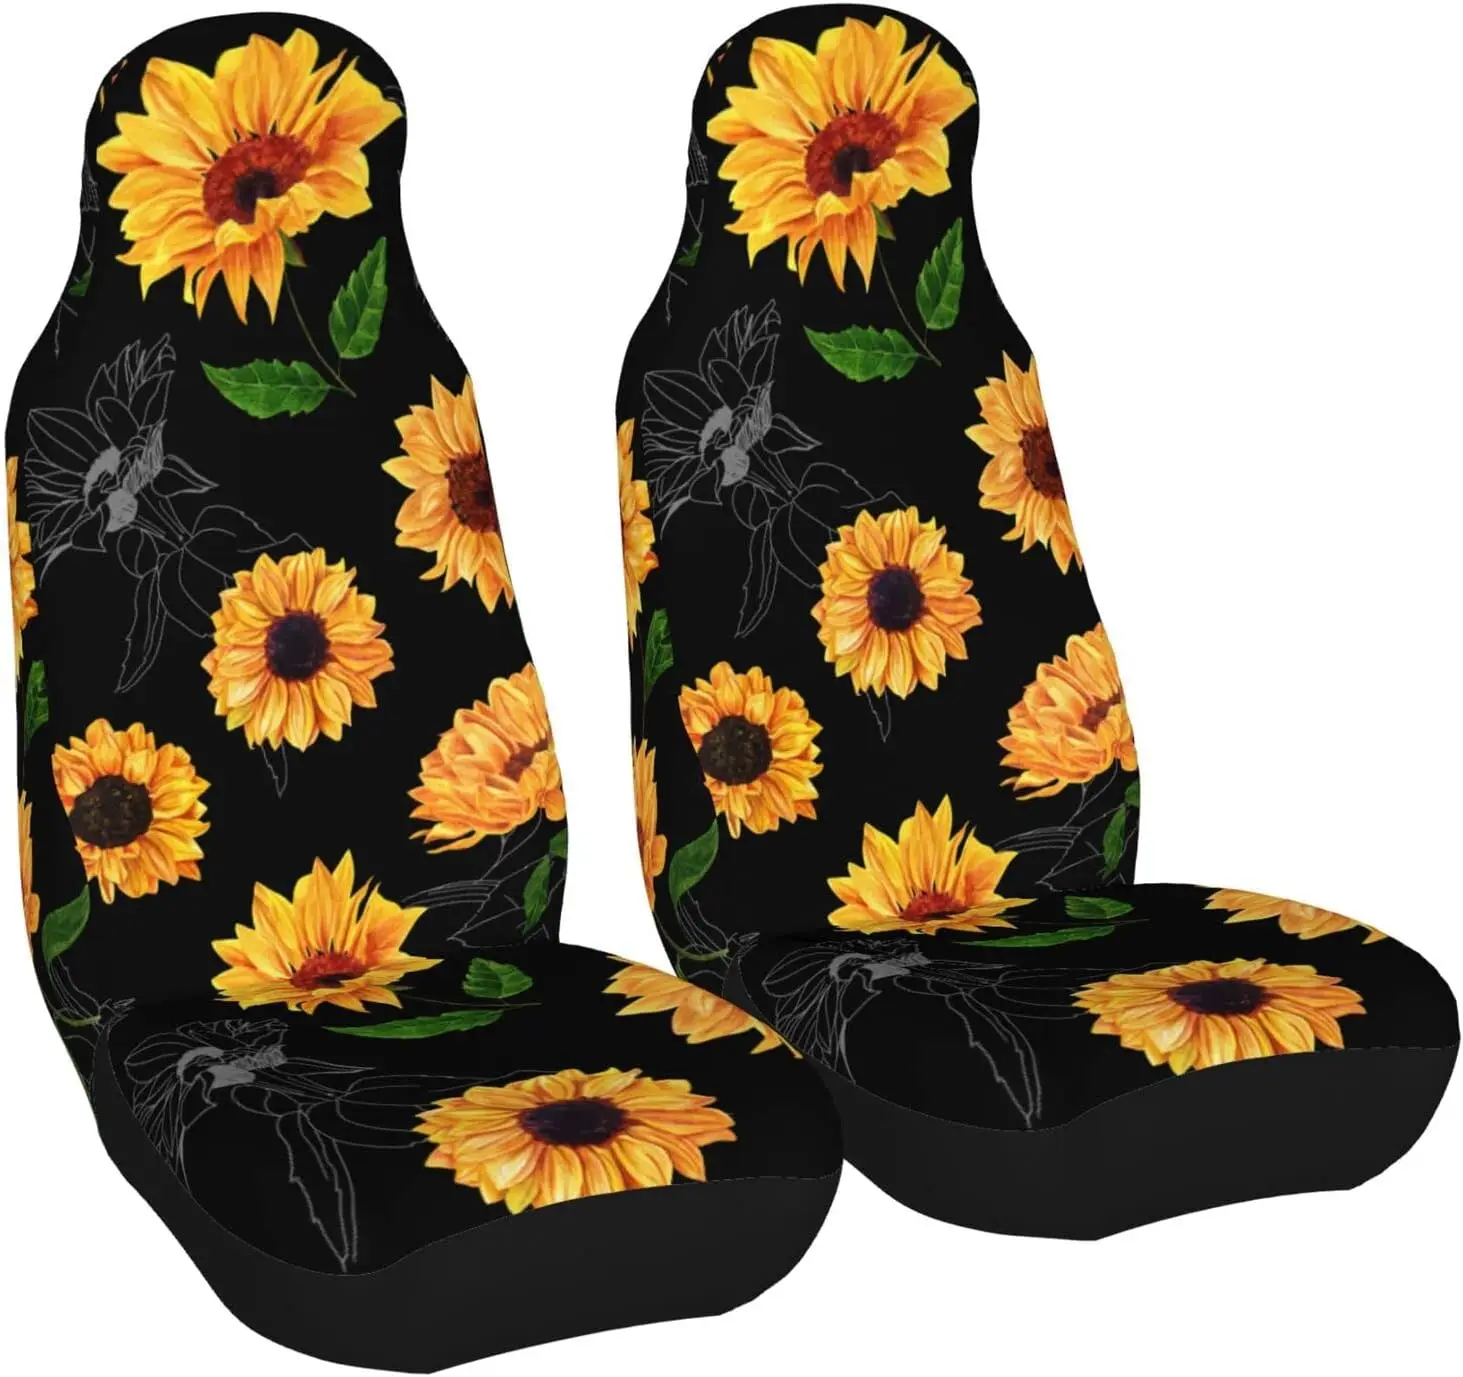 

Car Seat Covers 2pcs Sunflowers Front Car Seats Vehicle Enterior Protector Suitable Fits Most Car Auto SUV Sedan Truck